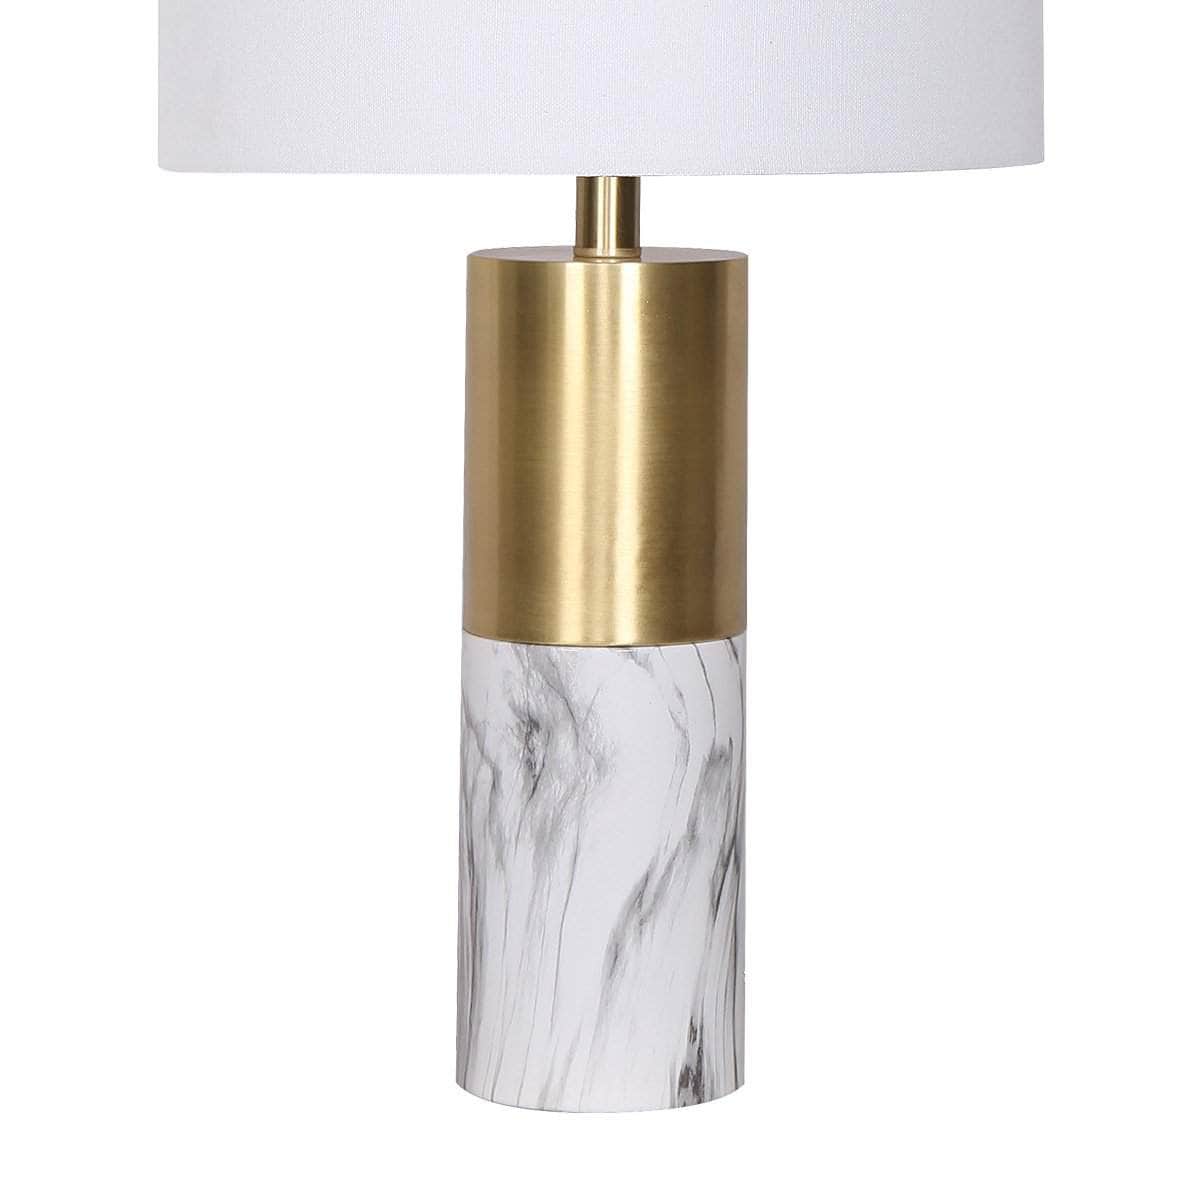 Modern Simplicity: White Metal and Marble Table Lamp